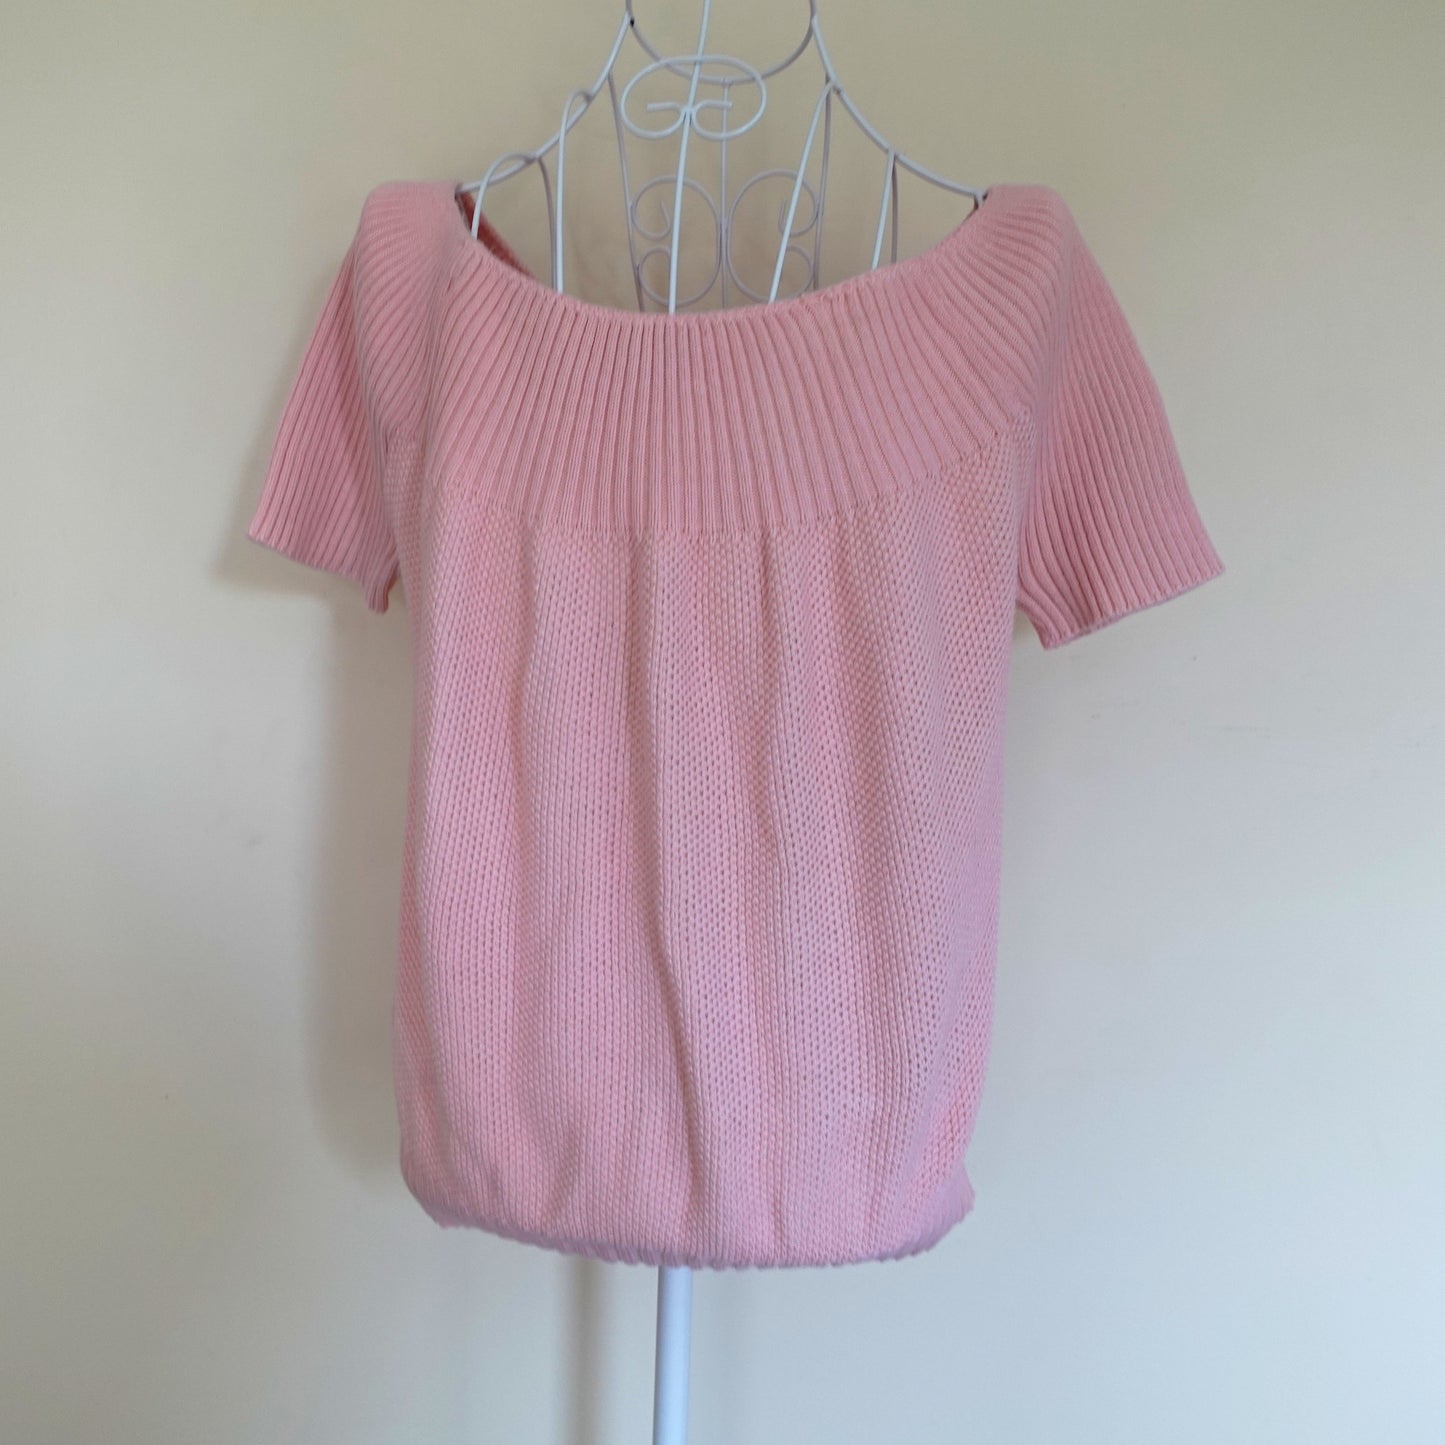 pink short sleeve knit sweater